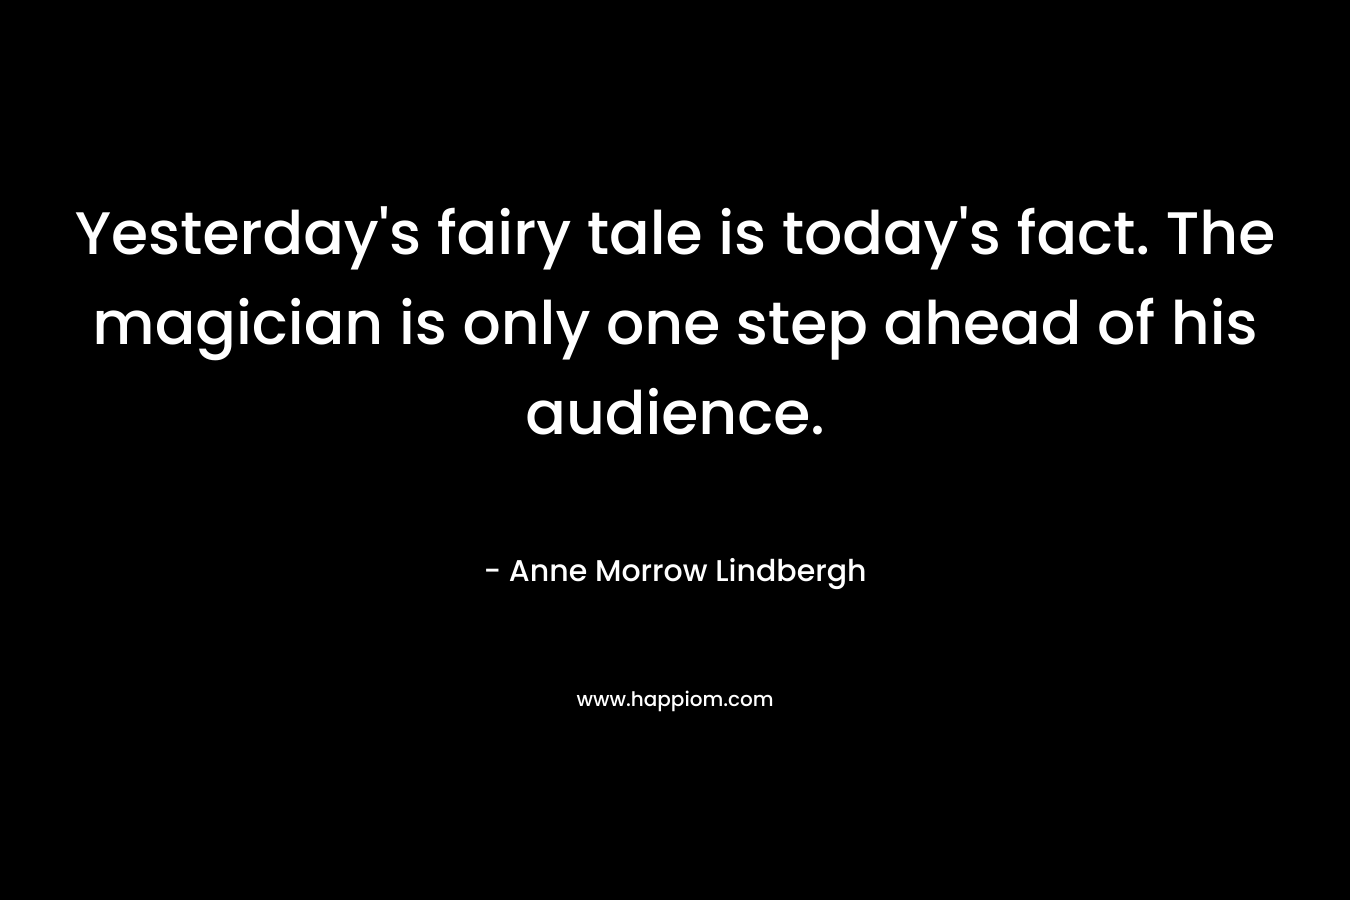 Yesterday’s fairy tale is today’s fact. The magician is only one step ahead of his audience. – Anne Morrow Lindbergh